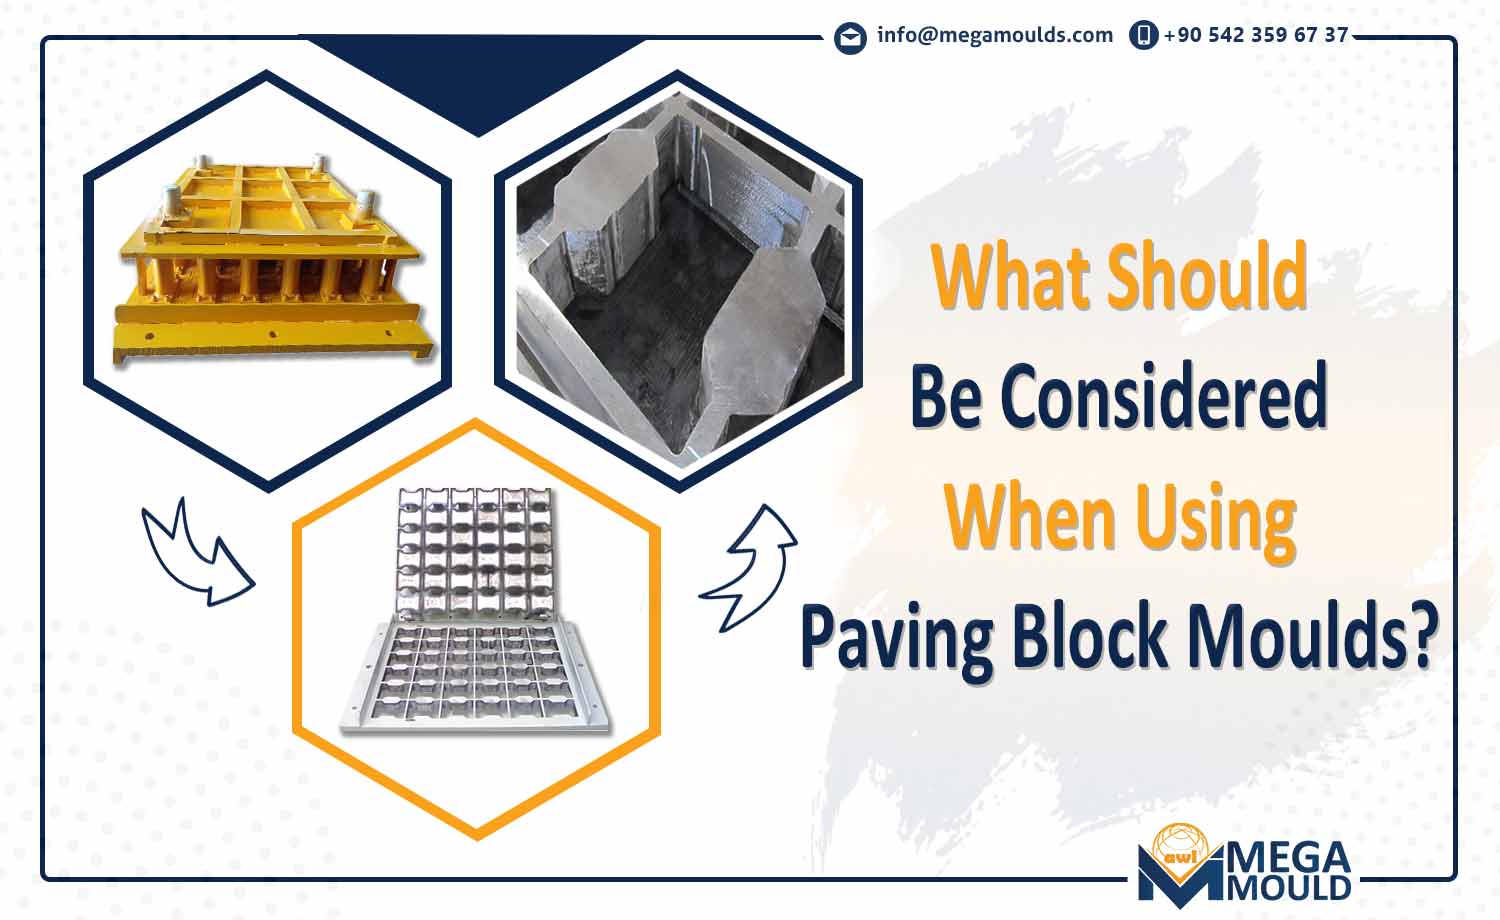 What Should Be Considered When Using Paving Block Moulds?